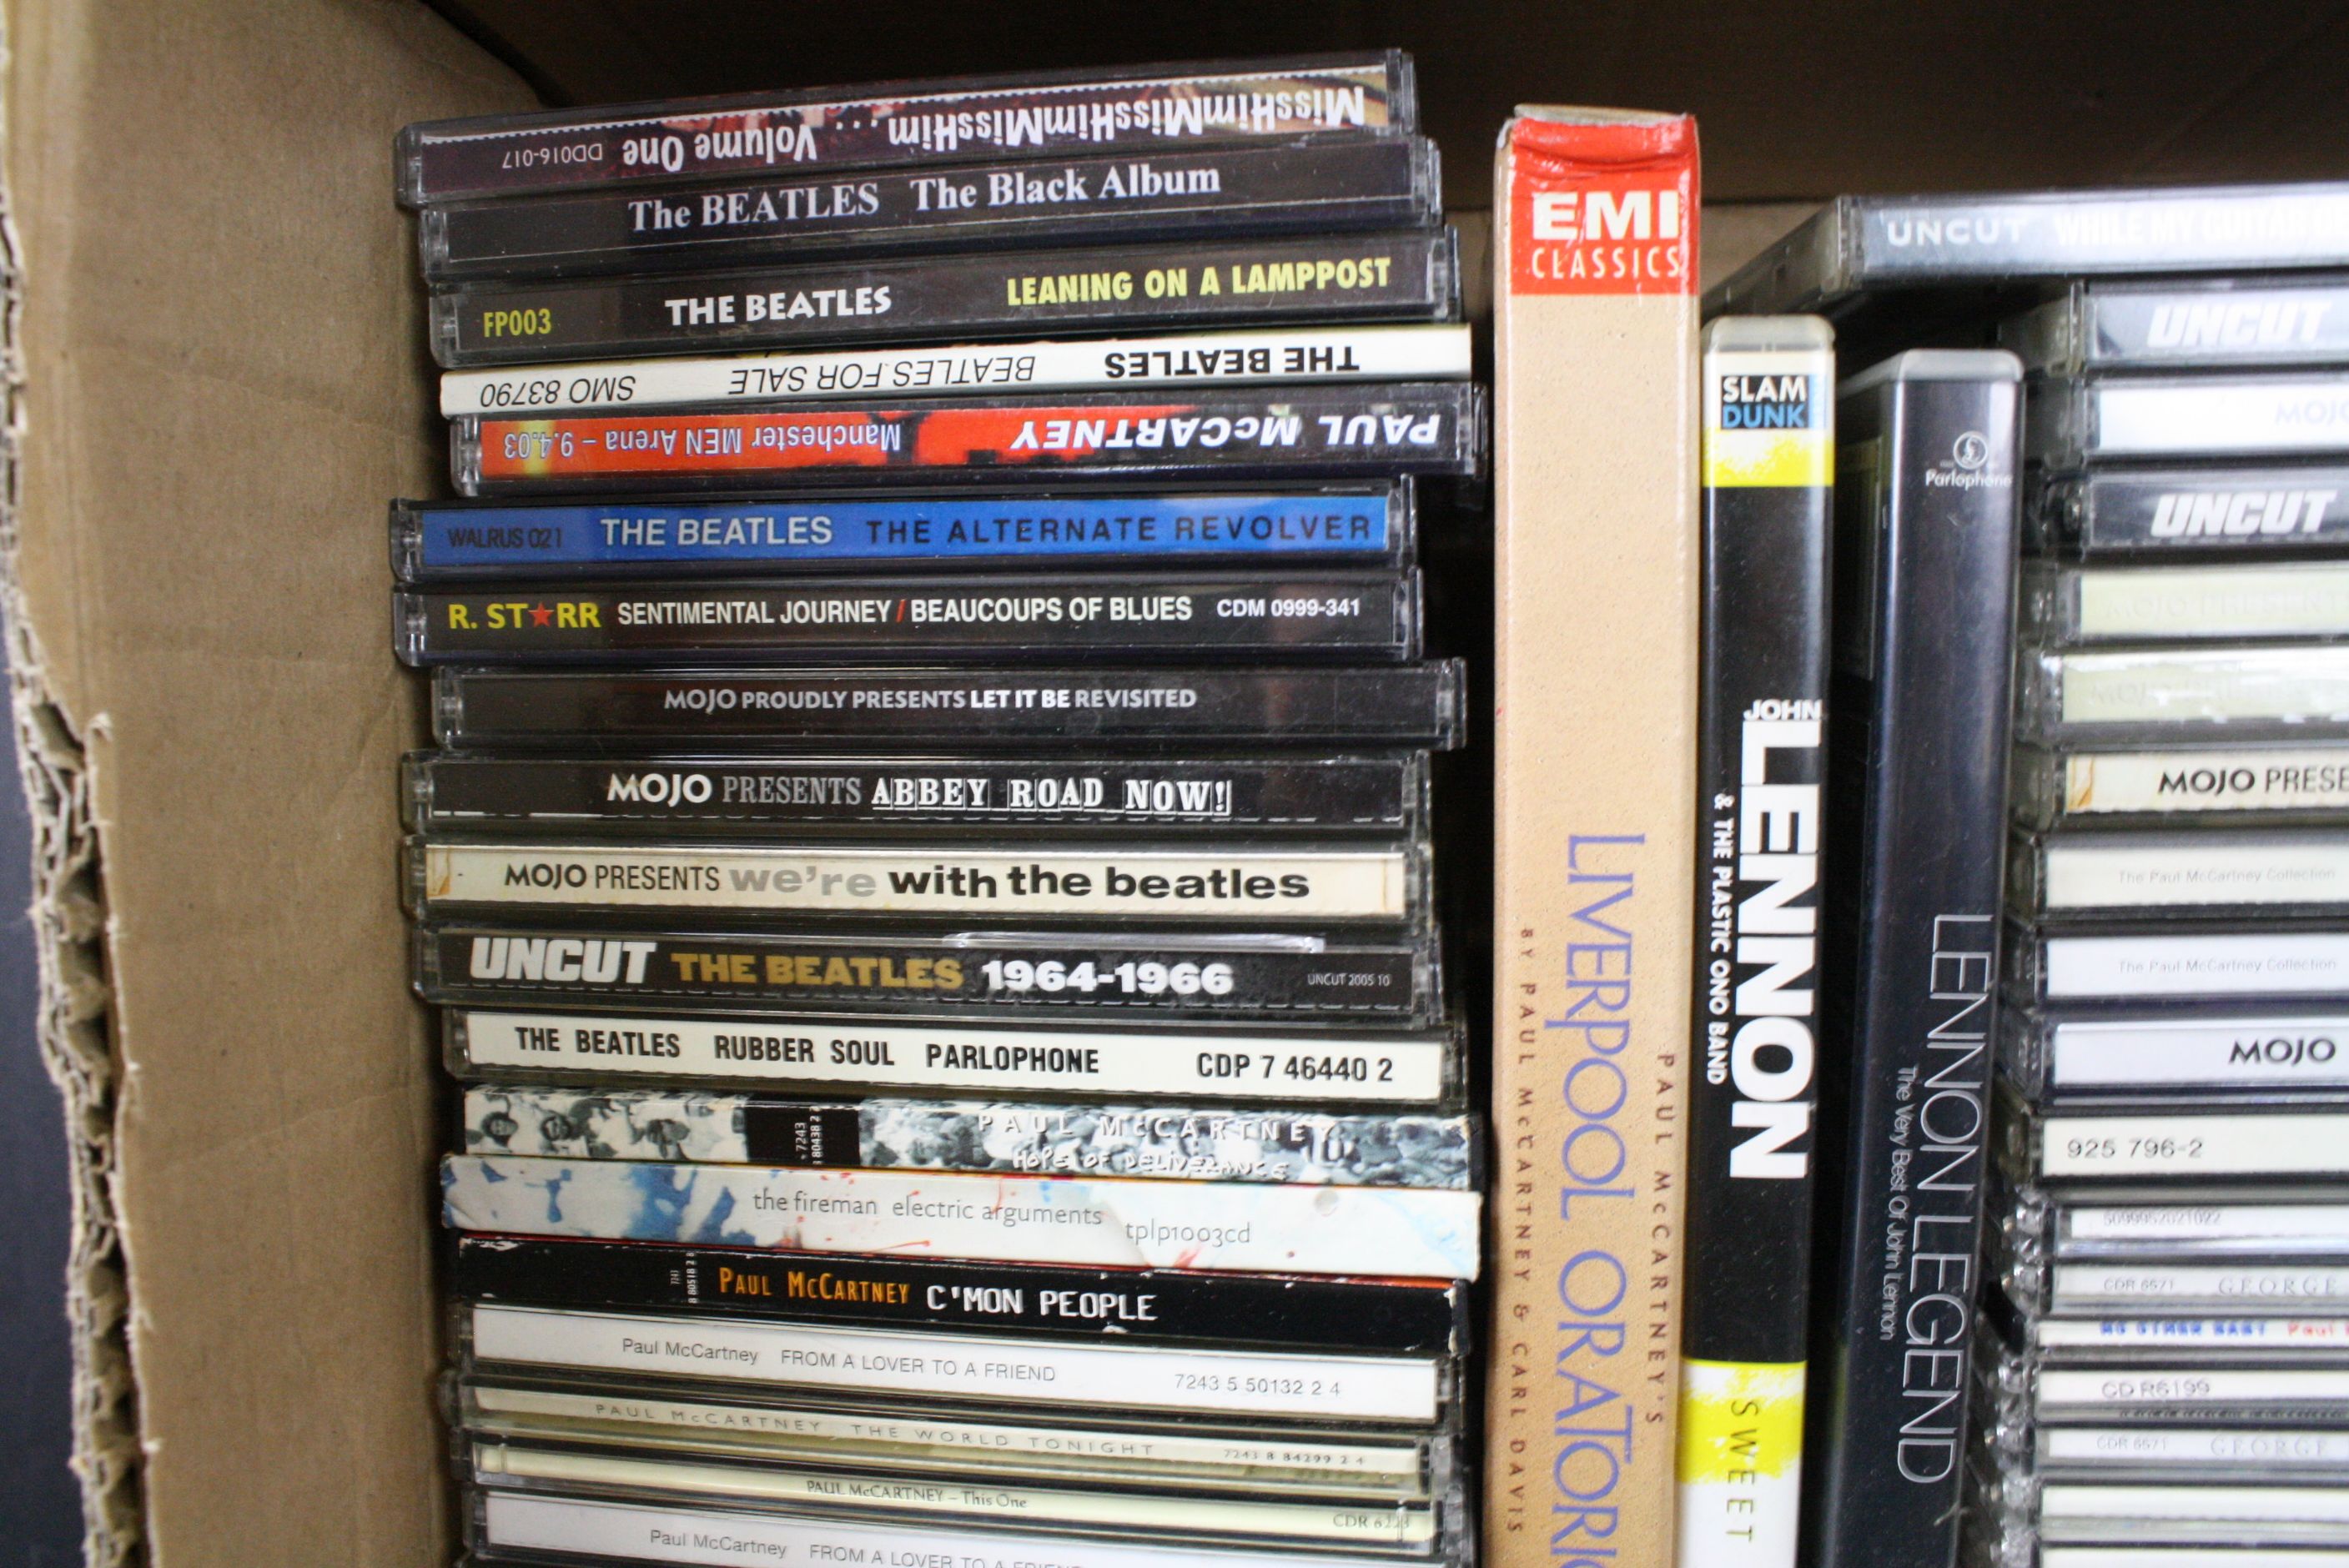 CDs - Over 150 Beatles and related CD's including imports, box sets, singles, giveaways, private - Image 5 of 18